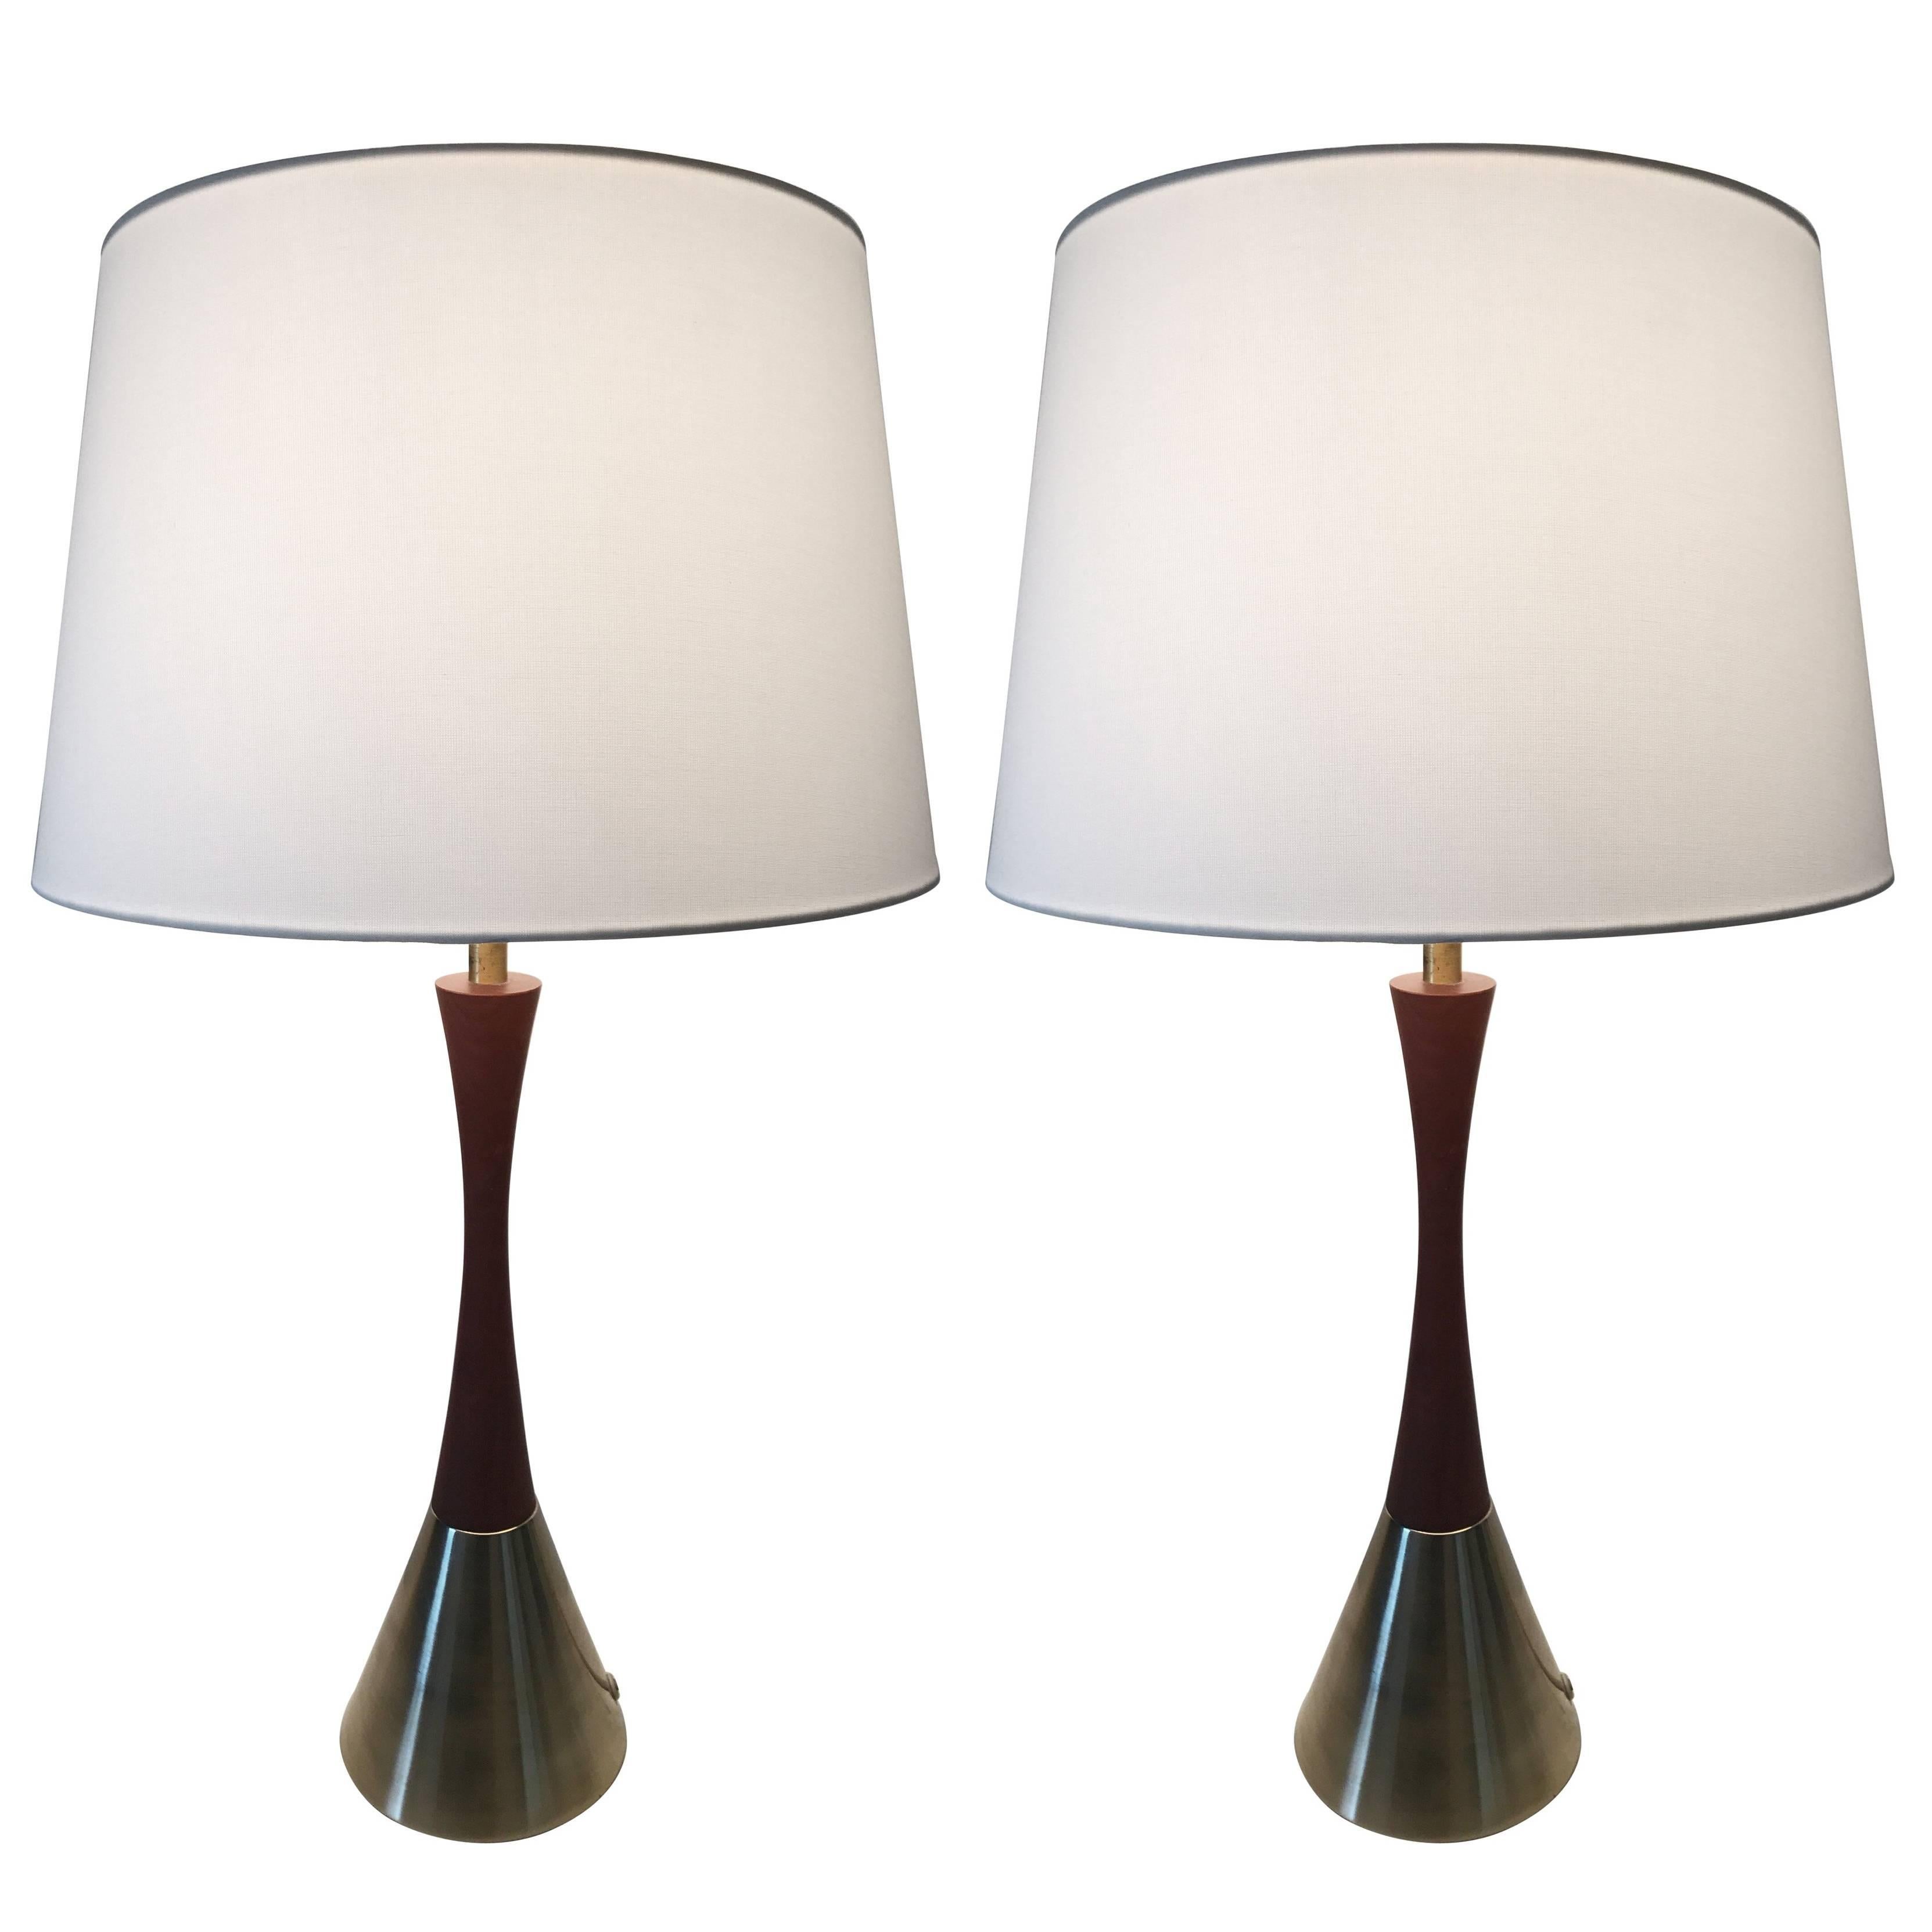 Pair of Rare Large Swedish Bergboms B-06 Teak and Brass Table Lamp, 1955 For Sale